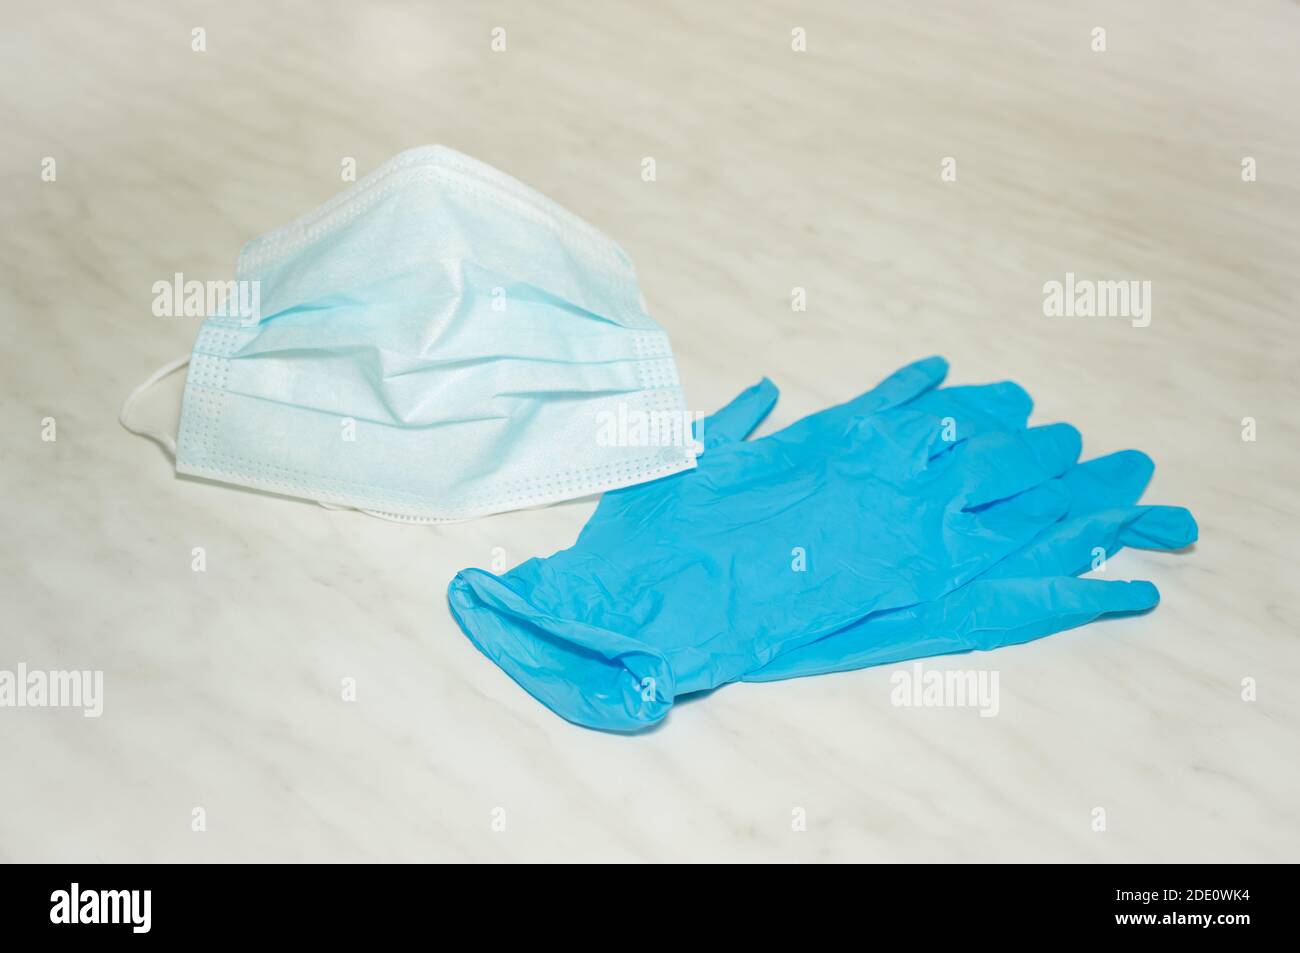 Personal protective equipment during the coronavirus pandemic - protective medical mask and gloves Stock Photo